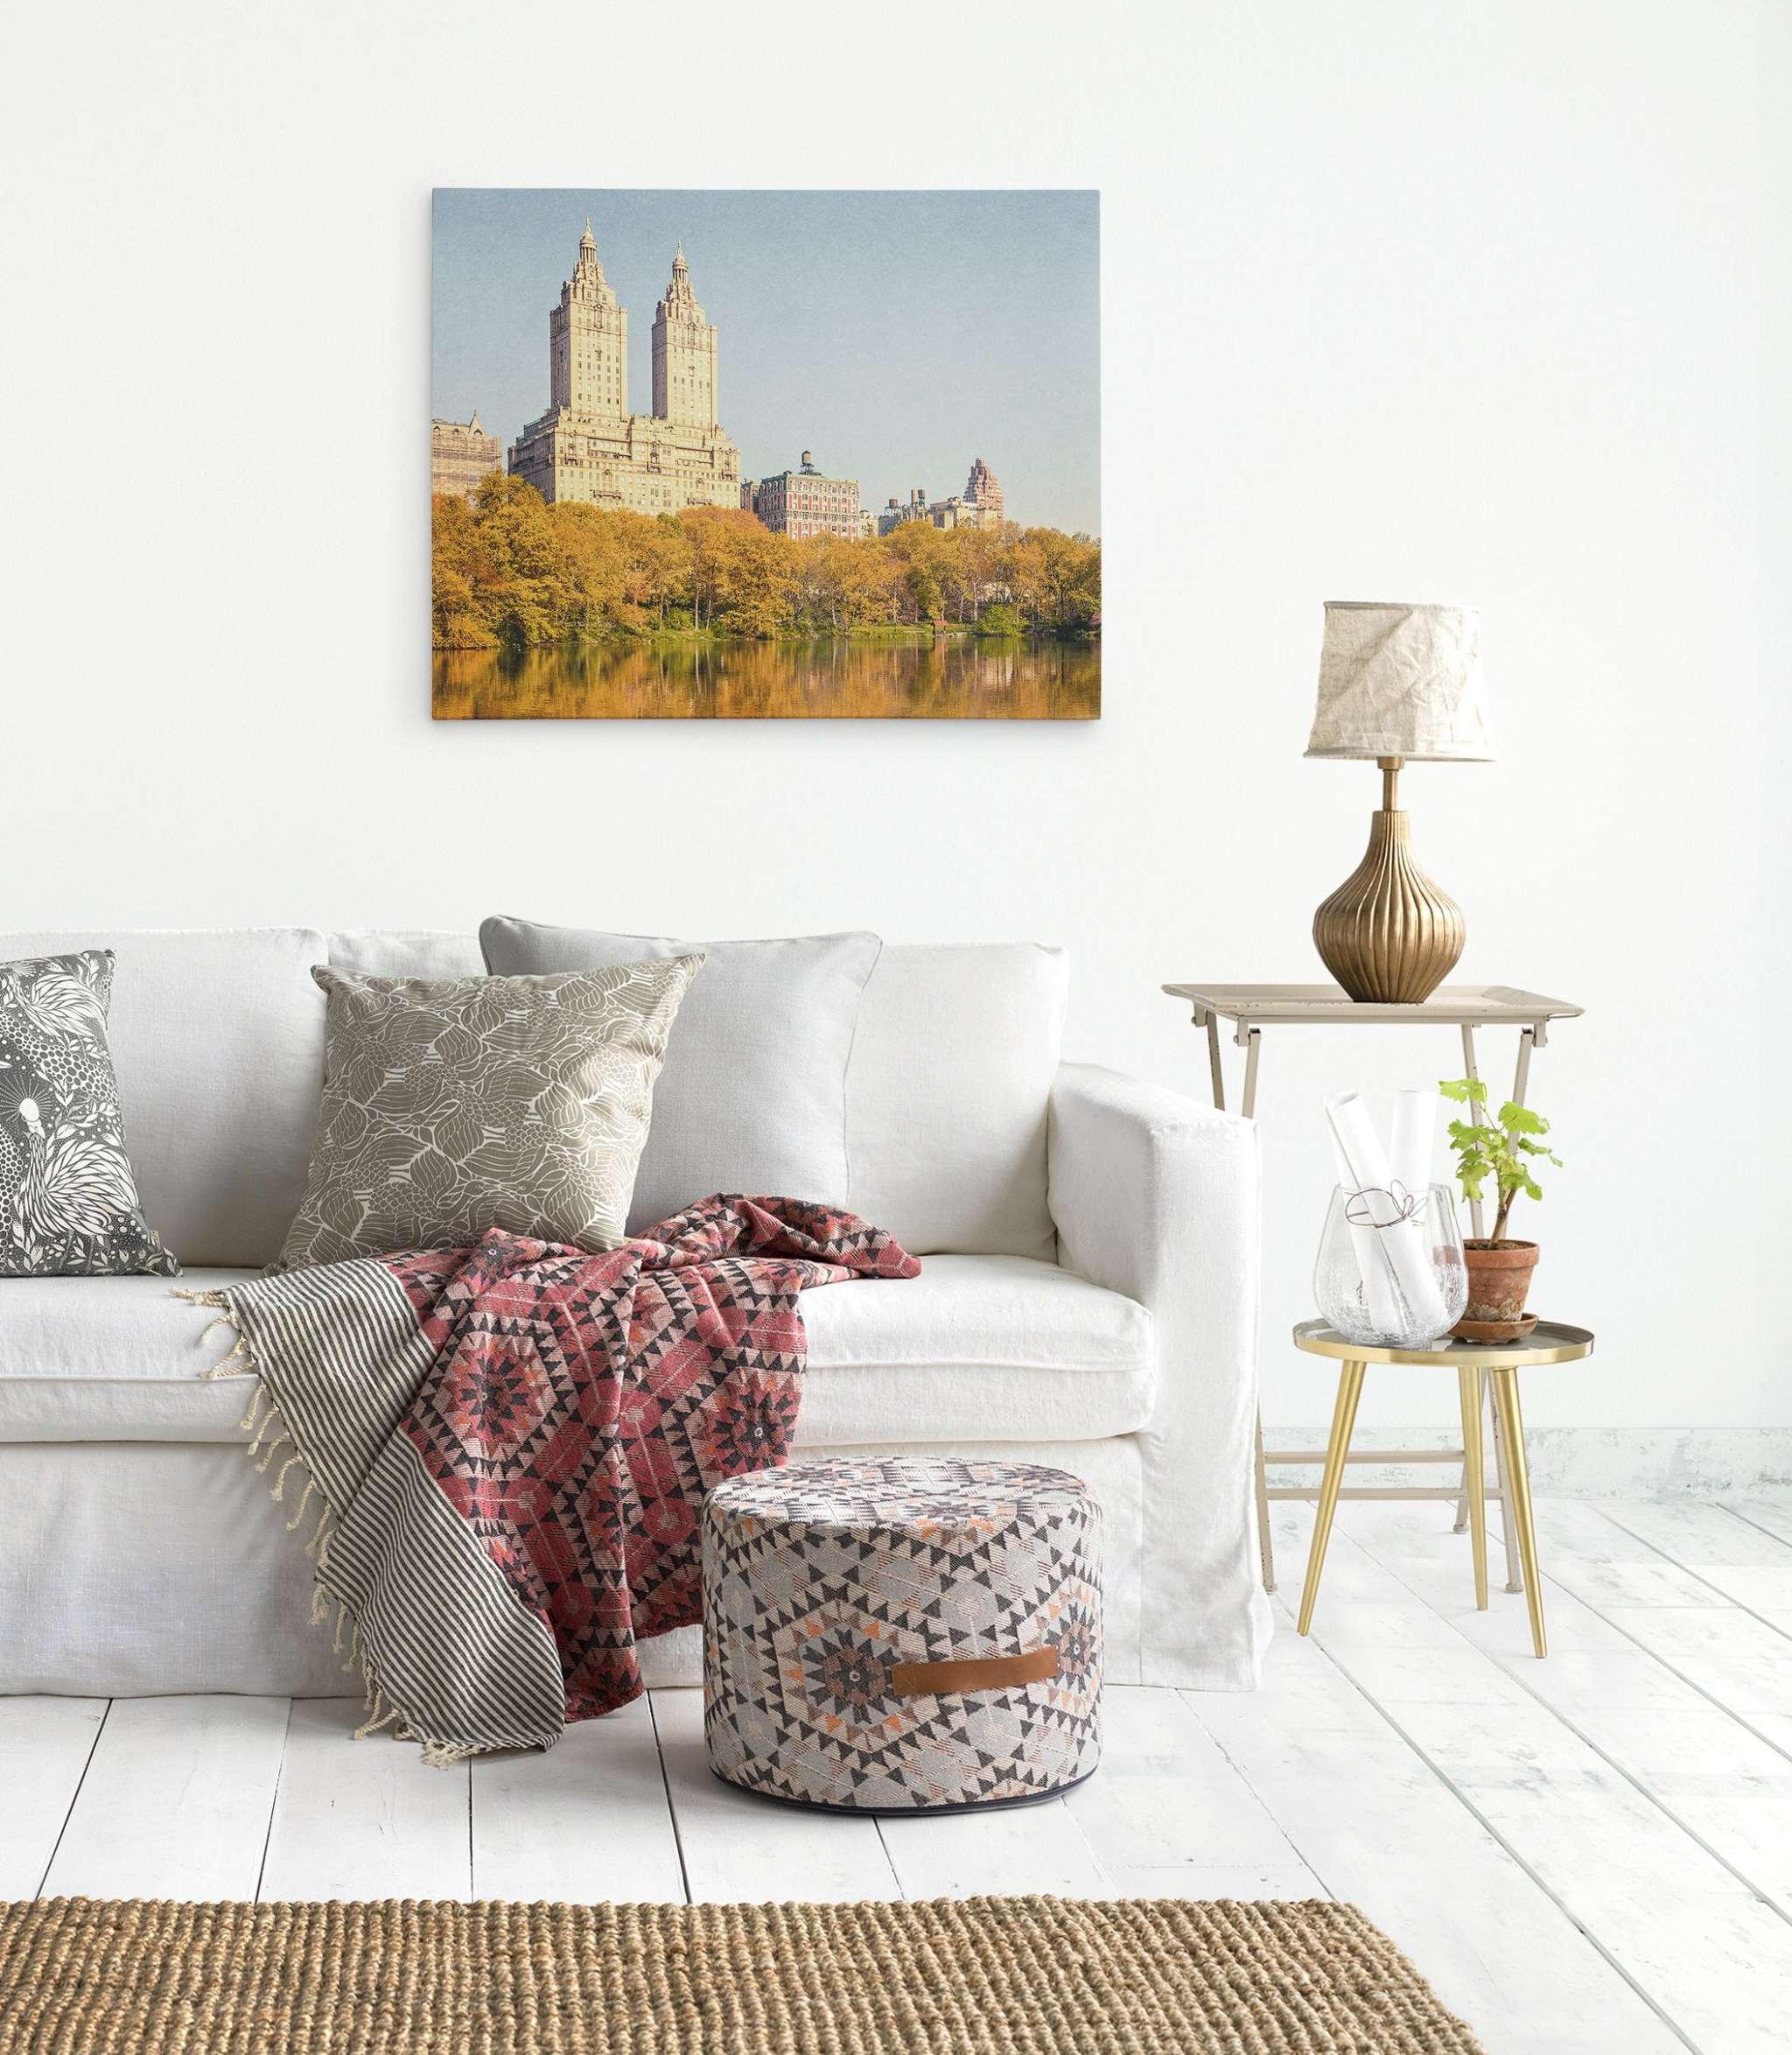 A cozy living room with white walls and floors. There's a white sofa adorned with various patterned pillows and a red geometric throw. A side table holds a lamp and a small plant. Above the sofa, an Offley Green New York City Canvas Wall Art, 'Central Park Fall' serves as the perfect ready-to-hang solution. A patterned pouf is in front.